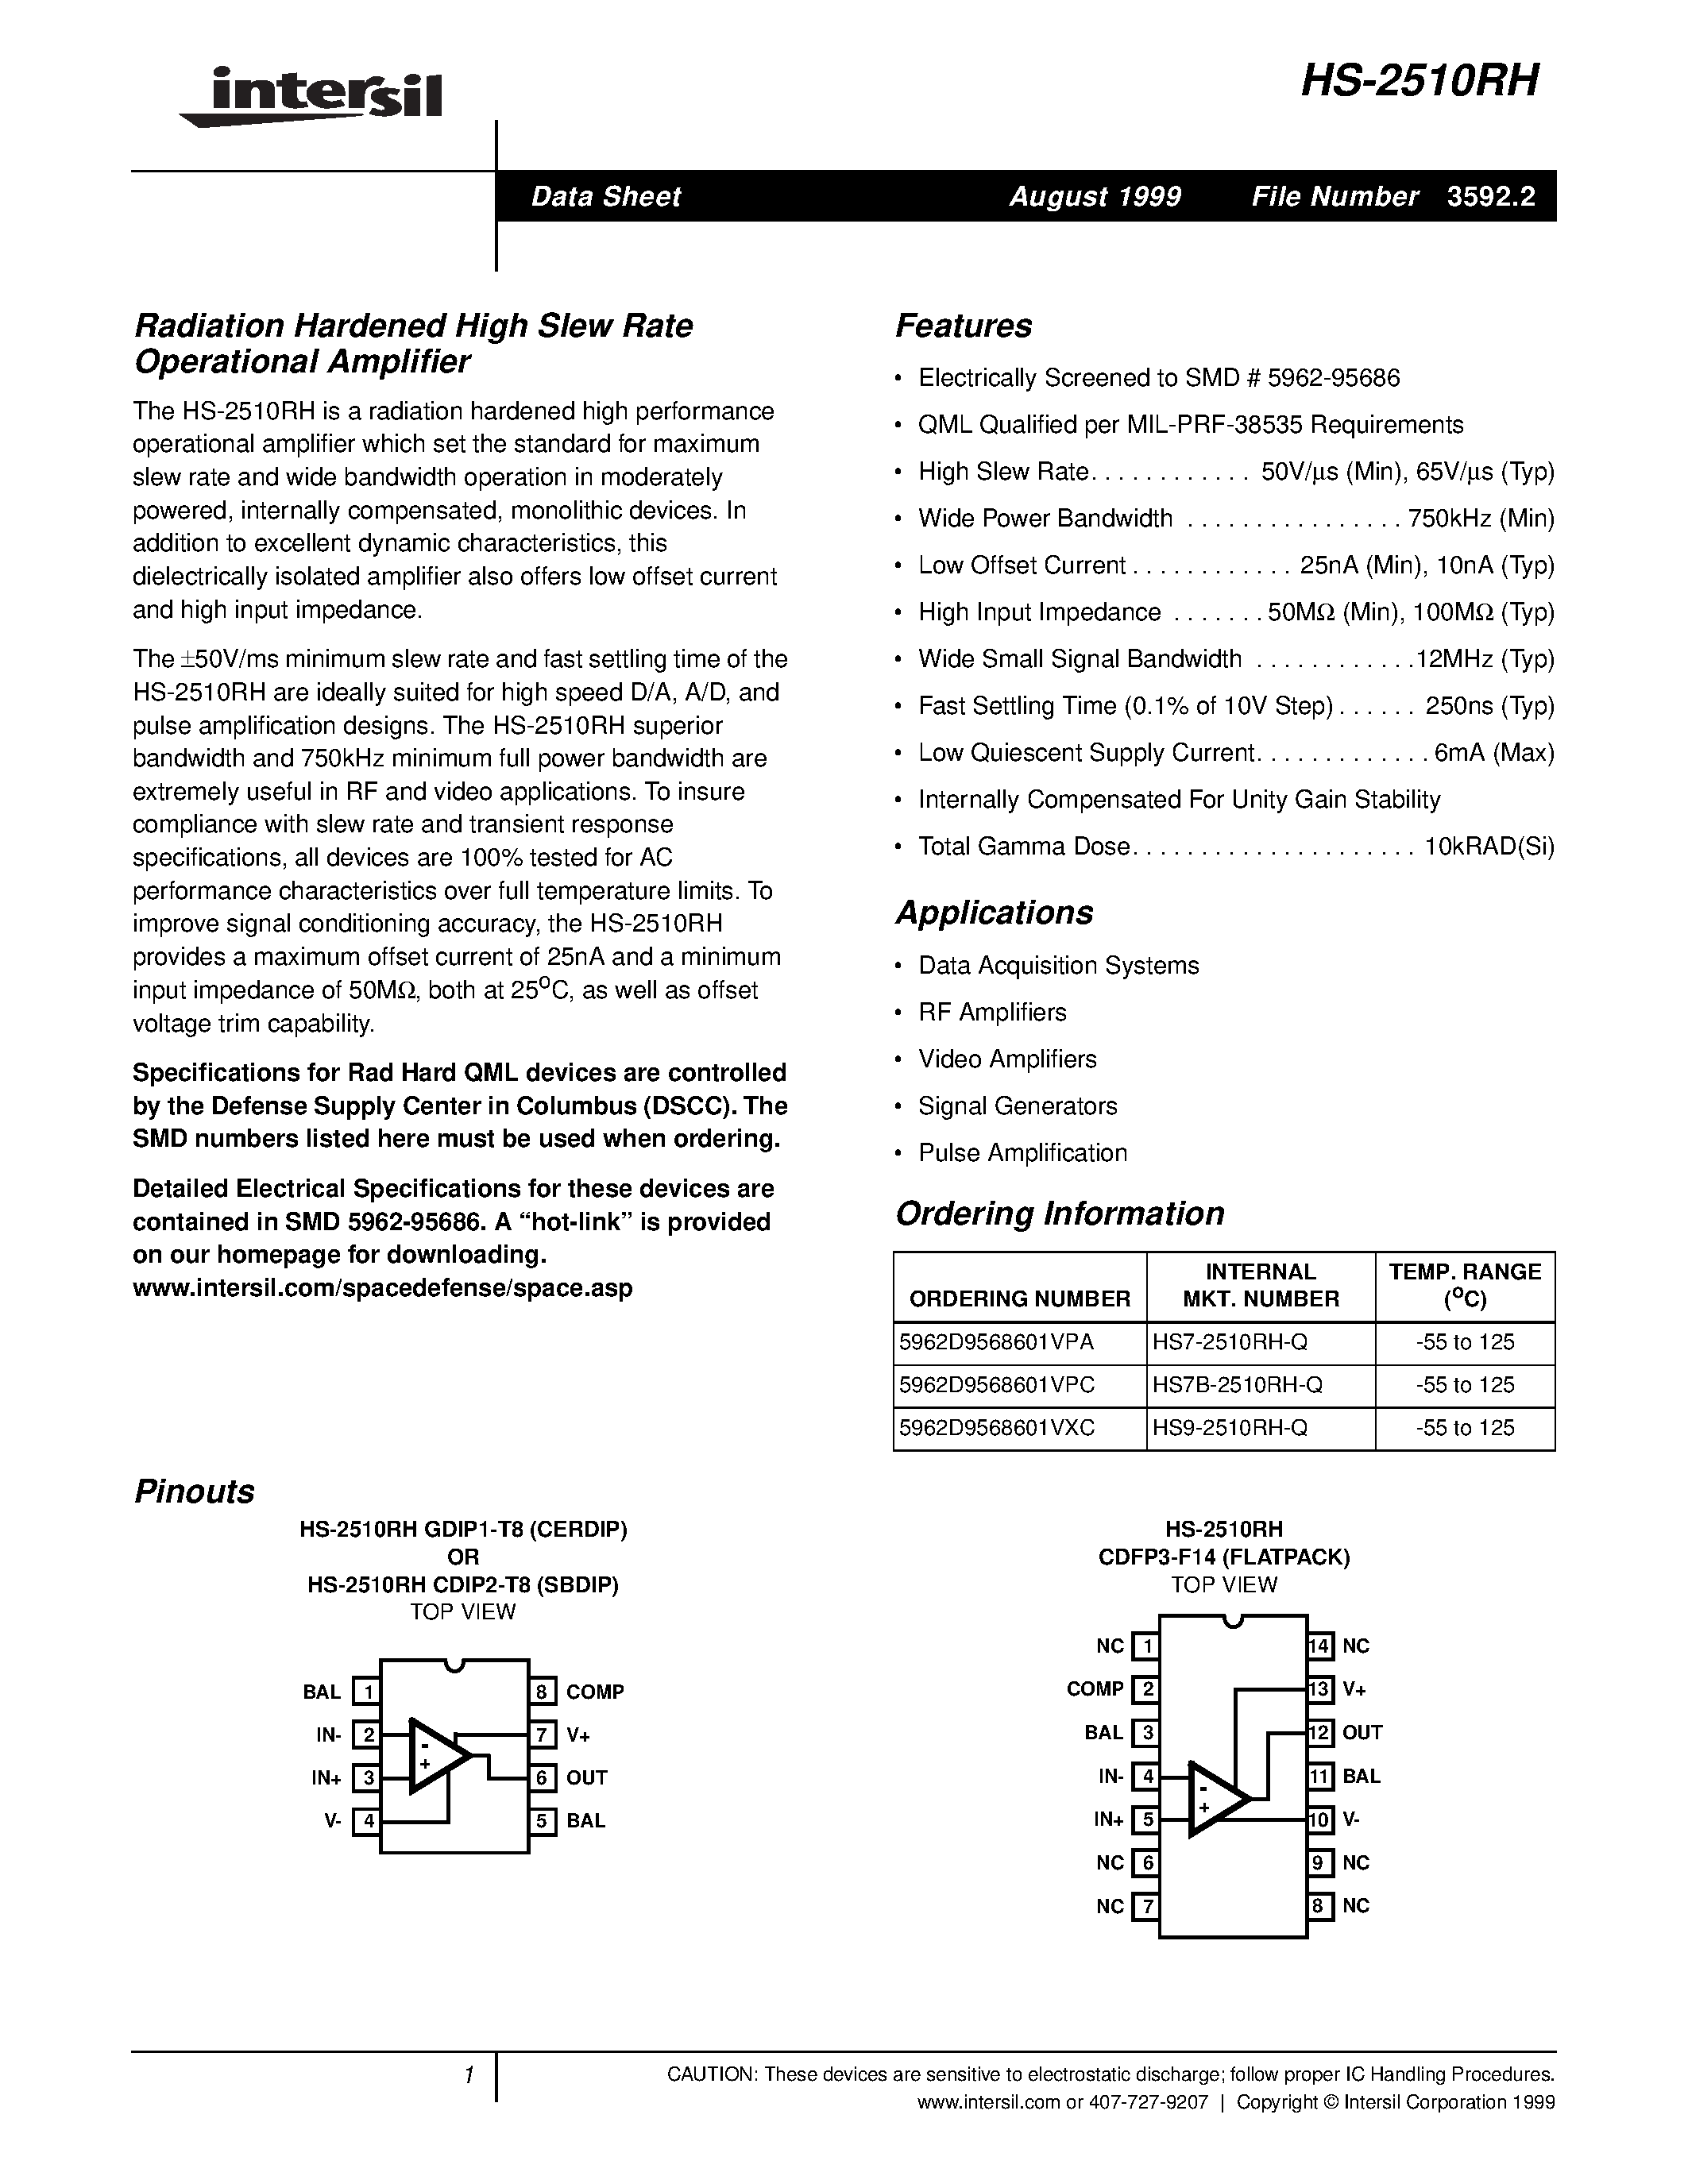 Datasheet HS7-2510RH-Q - Radiation Hardened High Slew Rate Operational Amplifier page 1